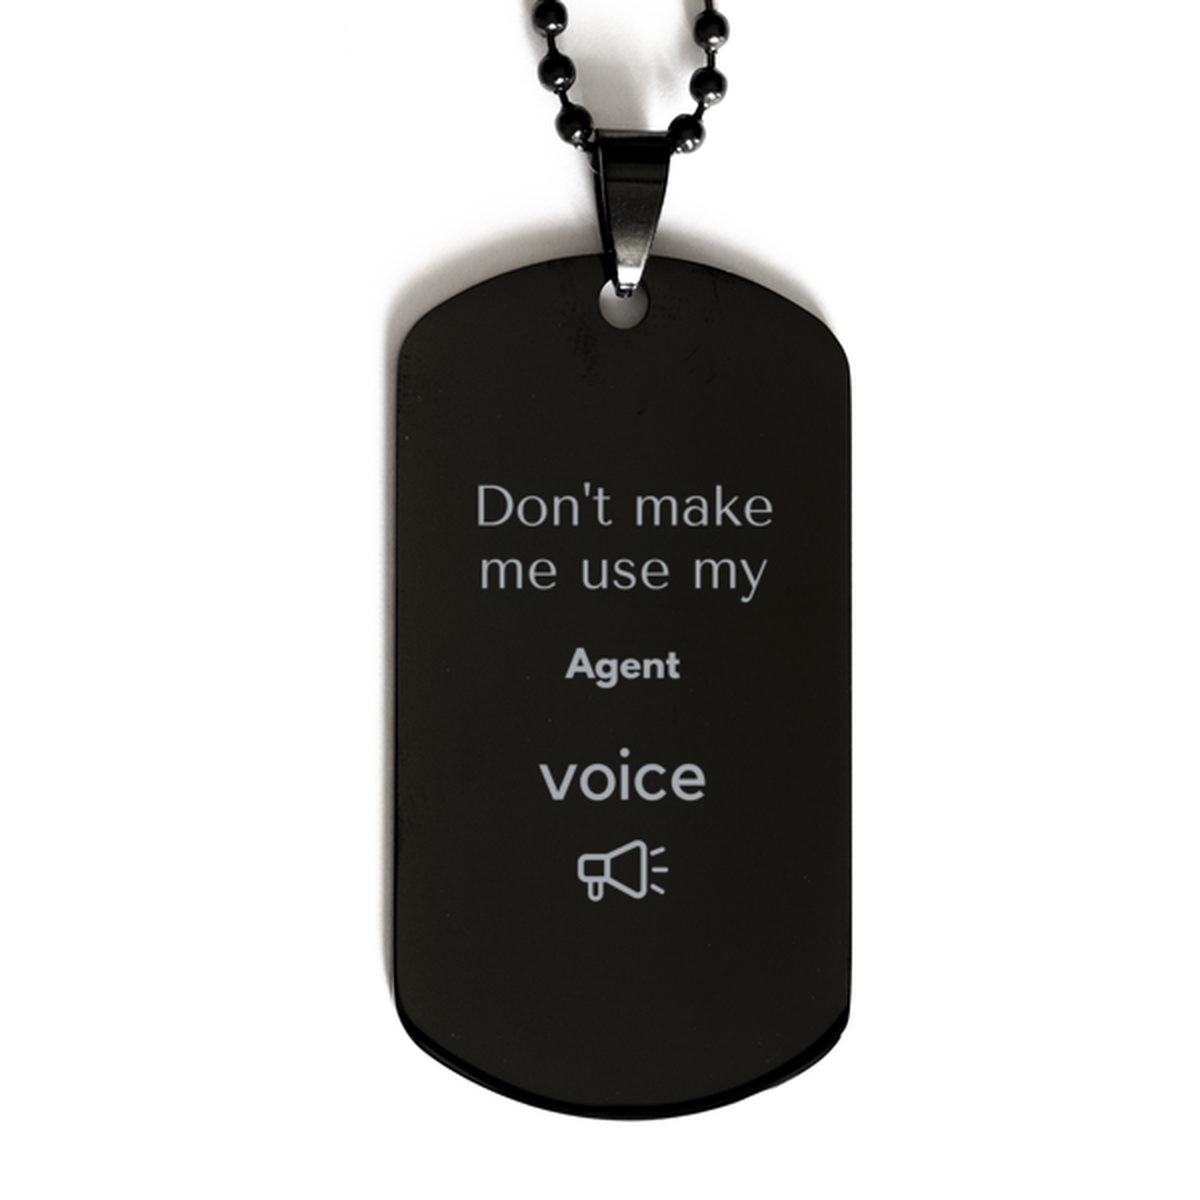 Don't make me use my Agent voice, Sarcasm Agent Gifts, Christmas Agent Black Dog Tag Birthday Unique Gifts For Agent Coworkers, Men, Women, Colleague, Friends